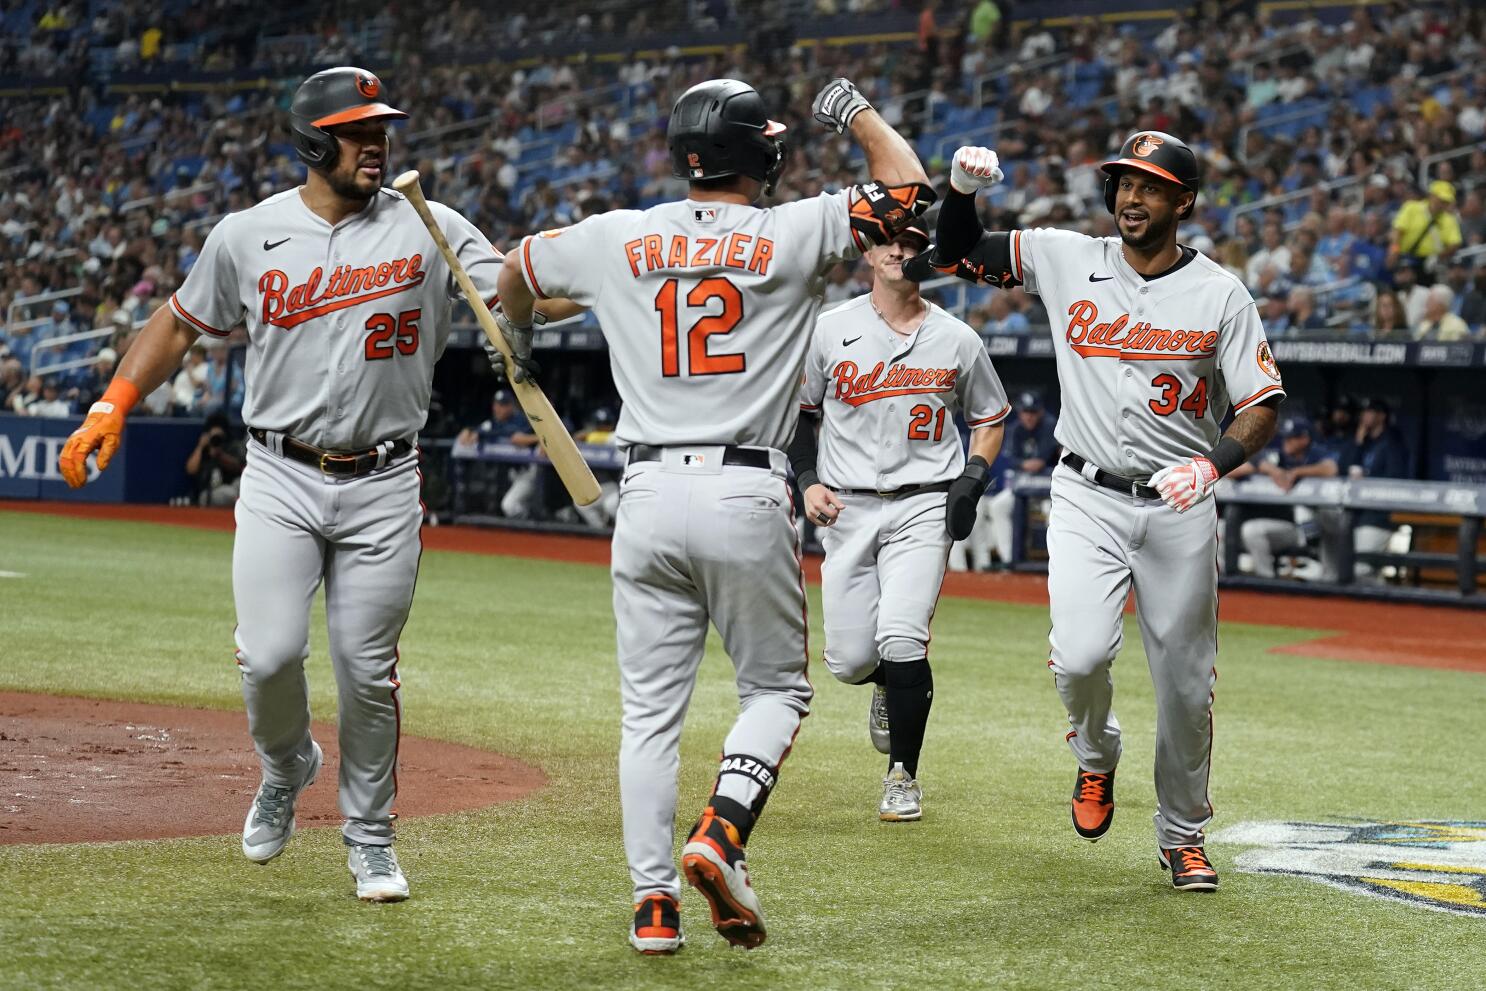 Hicks homers and drives in 4 as the Orioles beat the Rays 8-6 after nearly  blowing a 7-run lead - The San Diego Union-Tribune